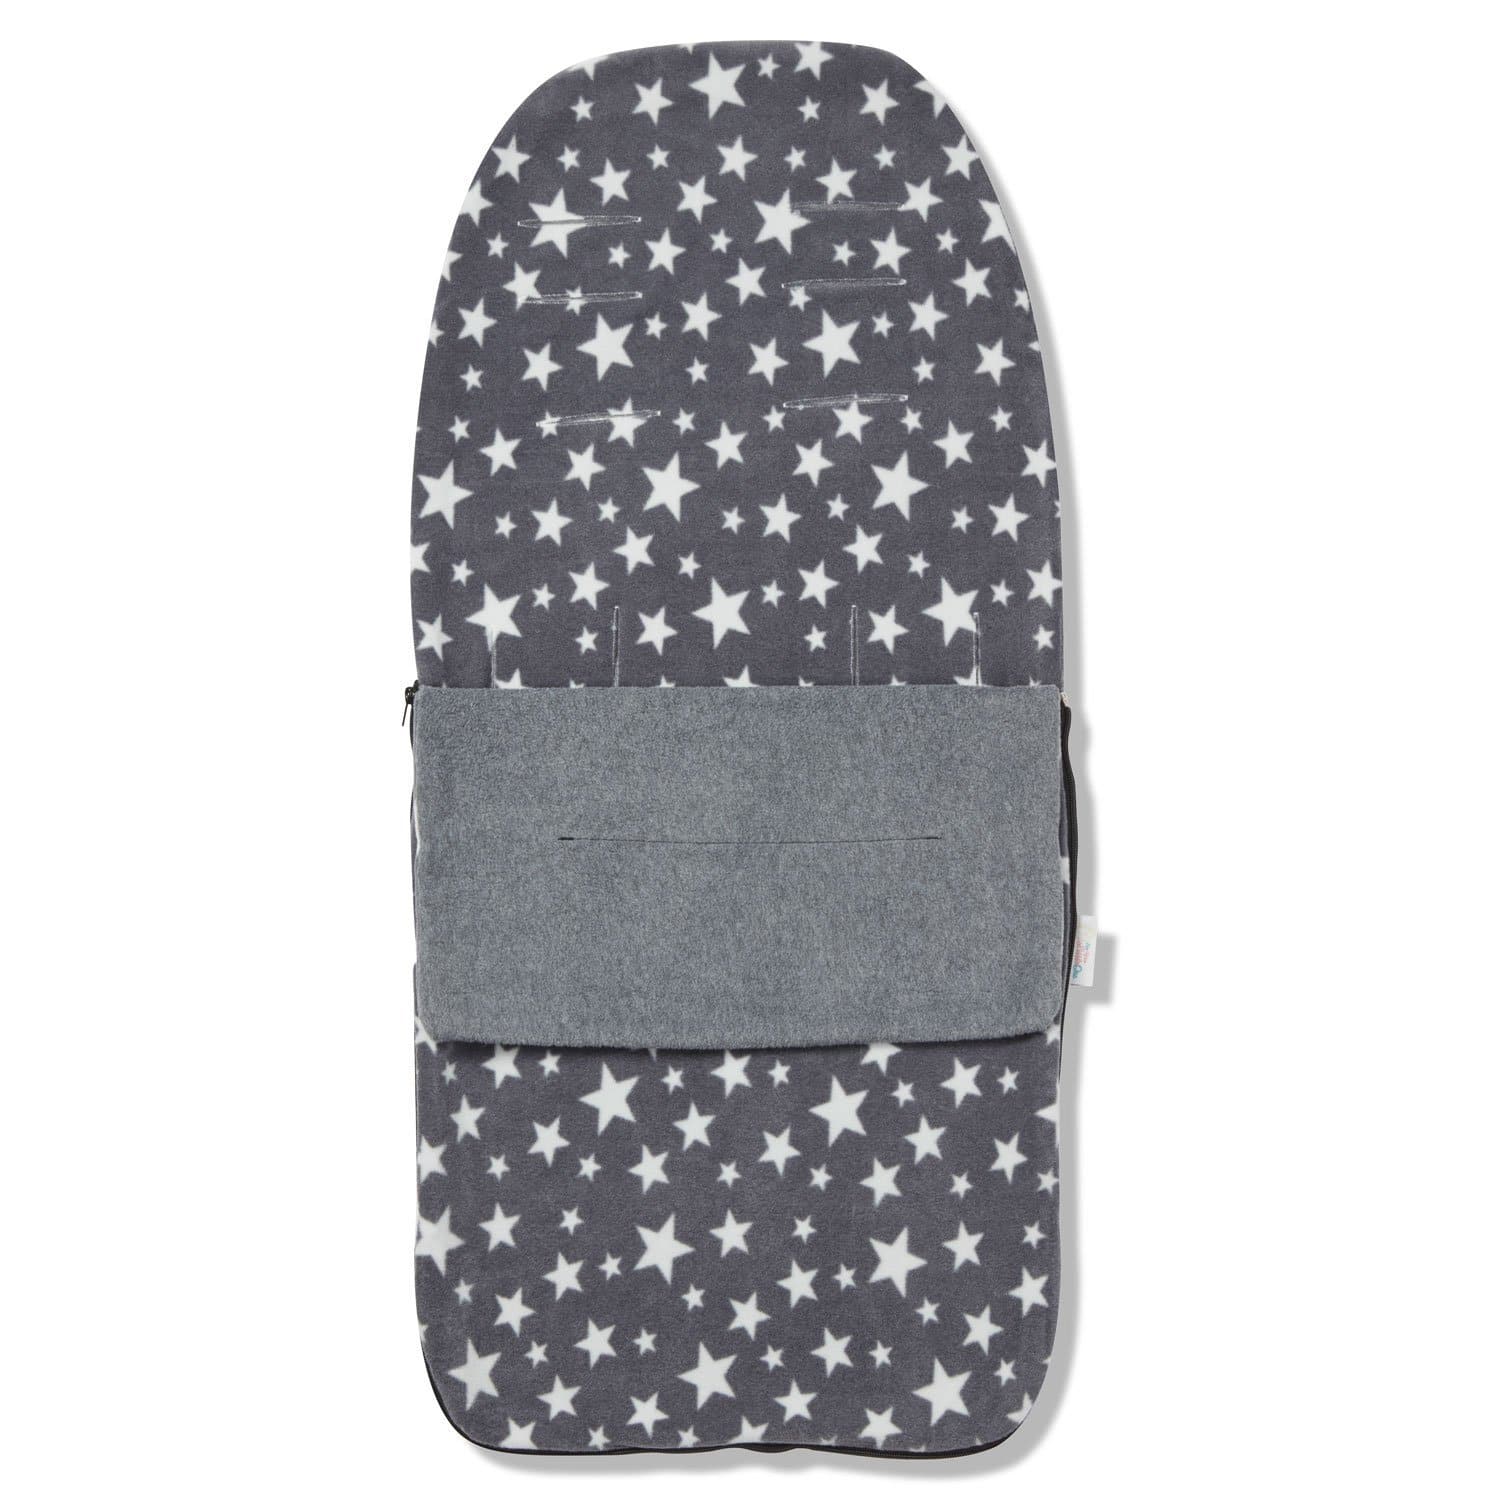 Snuggle Summer Footmuff Compatible with Maclaren - Grey Star / Fits All Models | For Your Little One